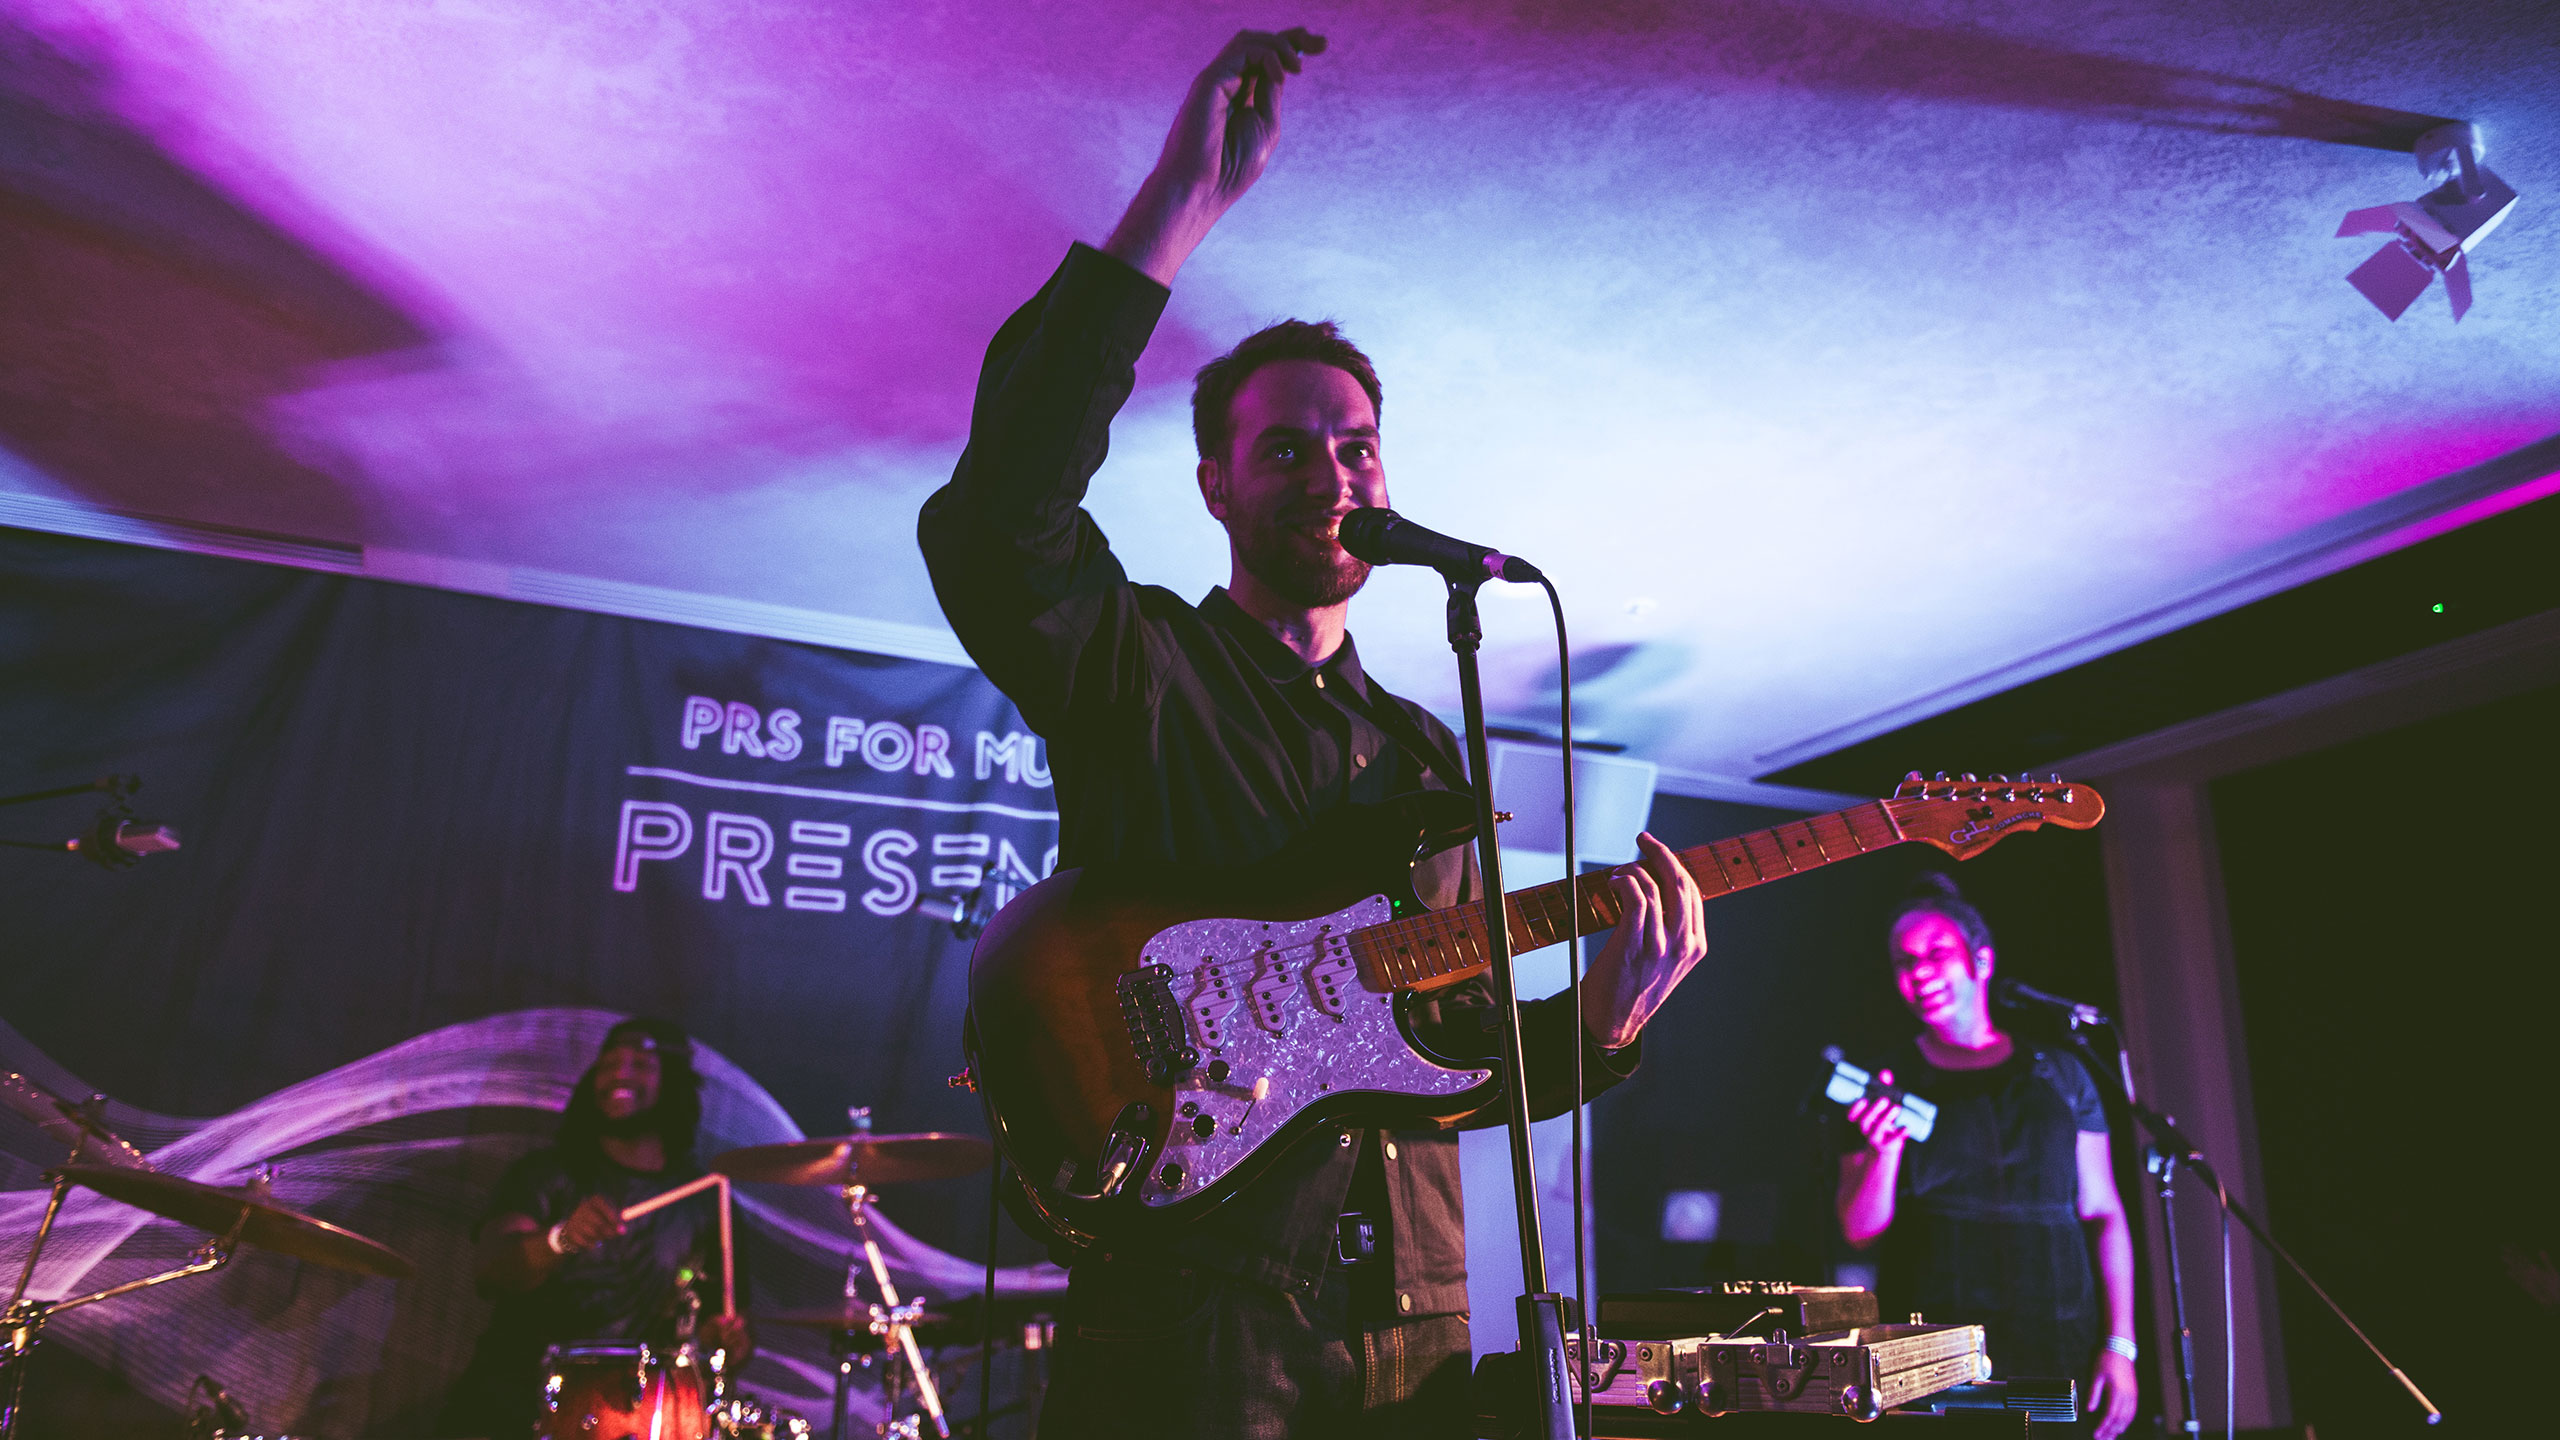 Honne's Andy Clutterbuck raises his arm as he sings and plays guitar at PRS Presents